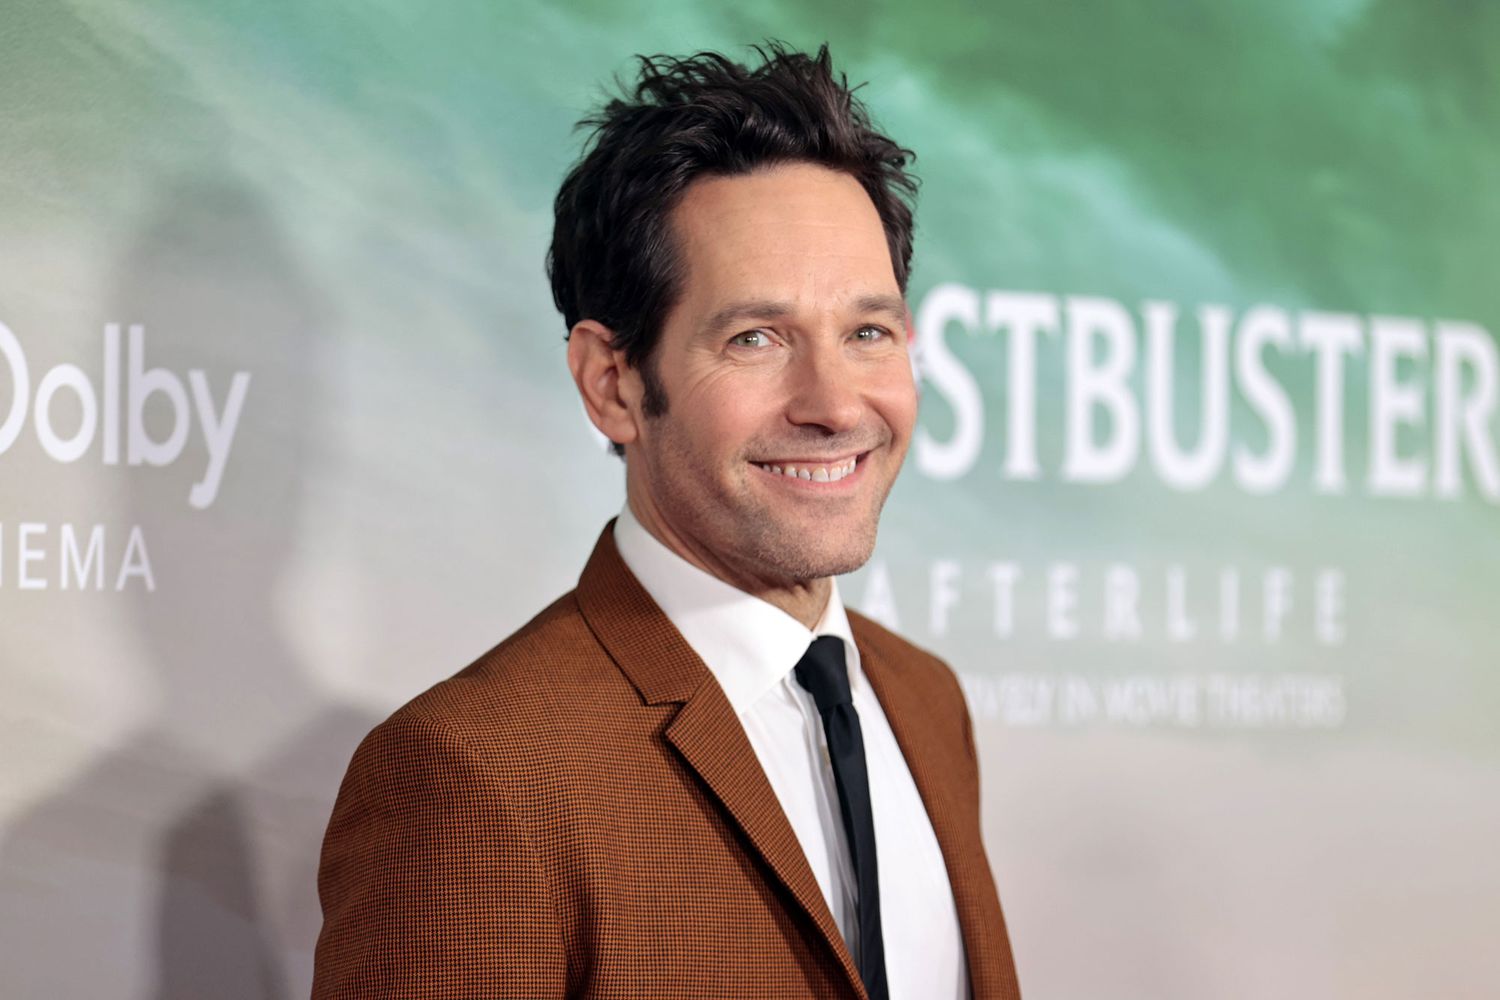 Actor Paul Rudd attends the "Ghostbusters: Afterlife" New York Premiere at AMC Lincoln Square Theater on November 15, 2021 in New York City.